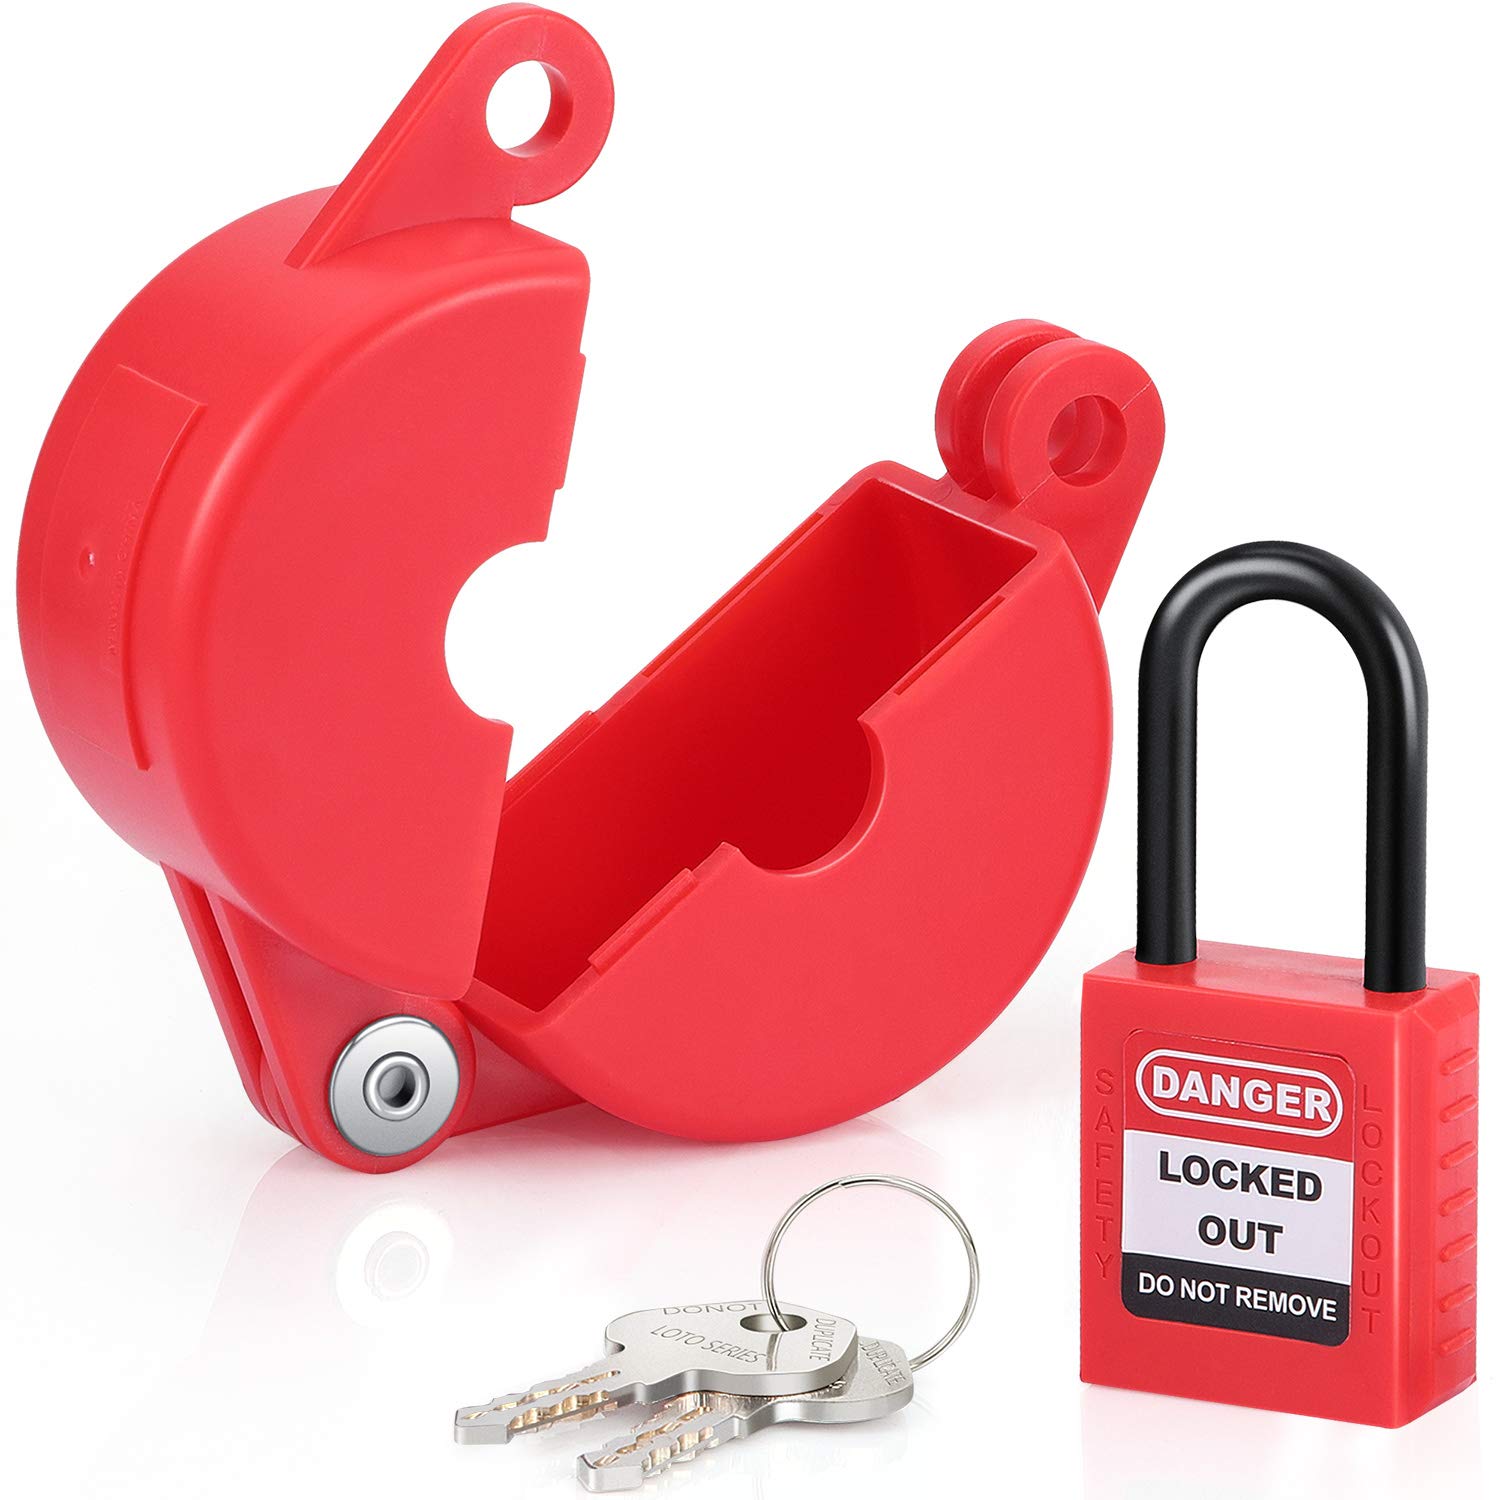 Honoson Valve Lockout And Safety Padlock Combination Oil Gas Valve Lock Natural Gas Valve For Chemical Industry, 1-2.5 Inch, Red